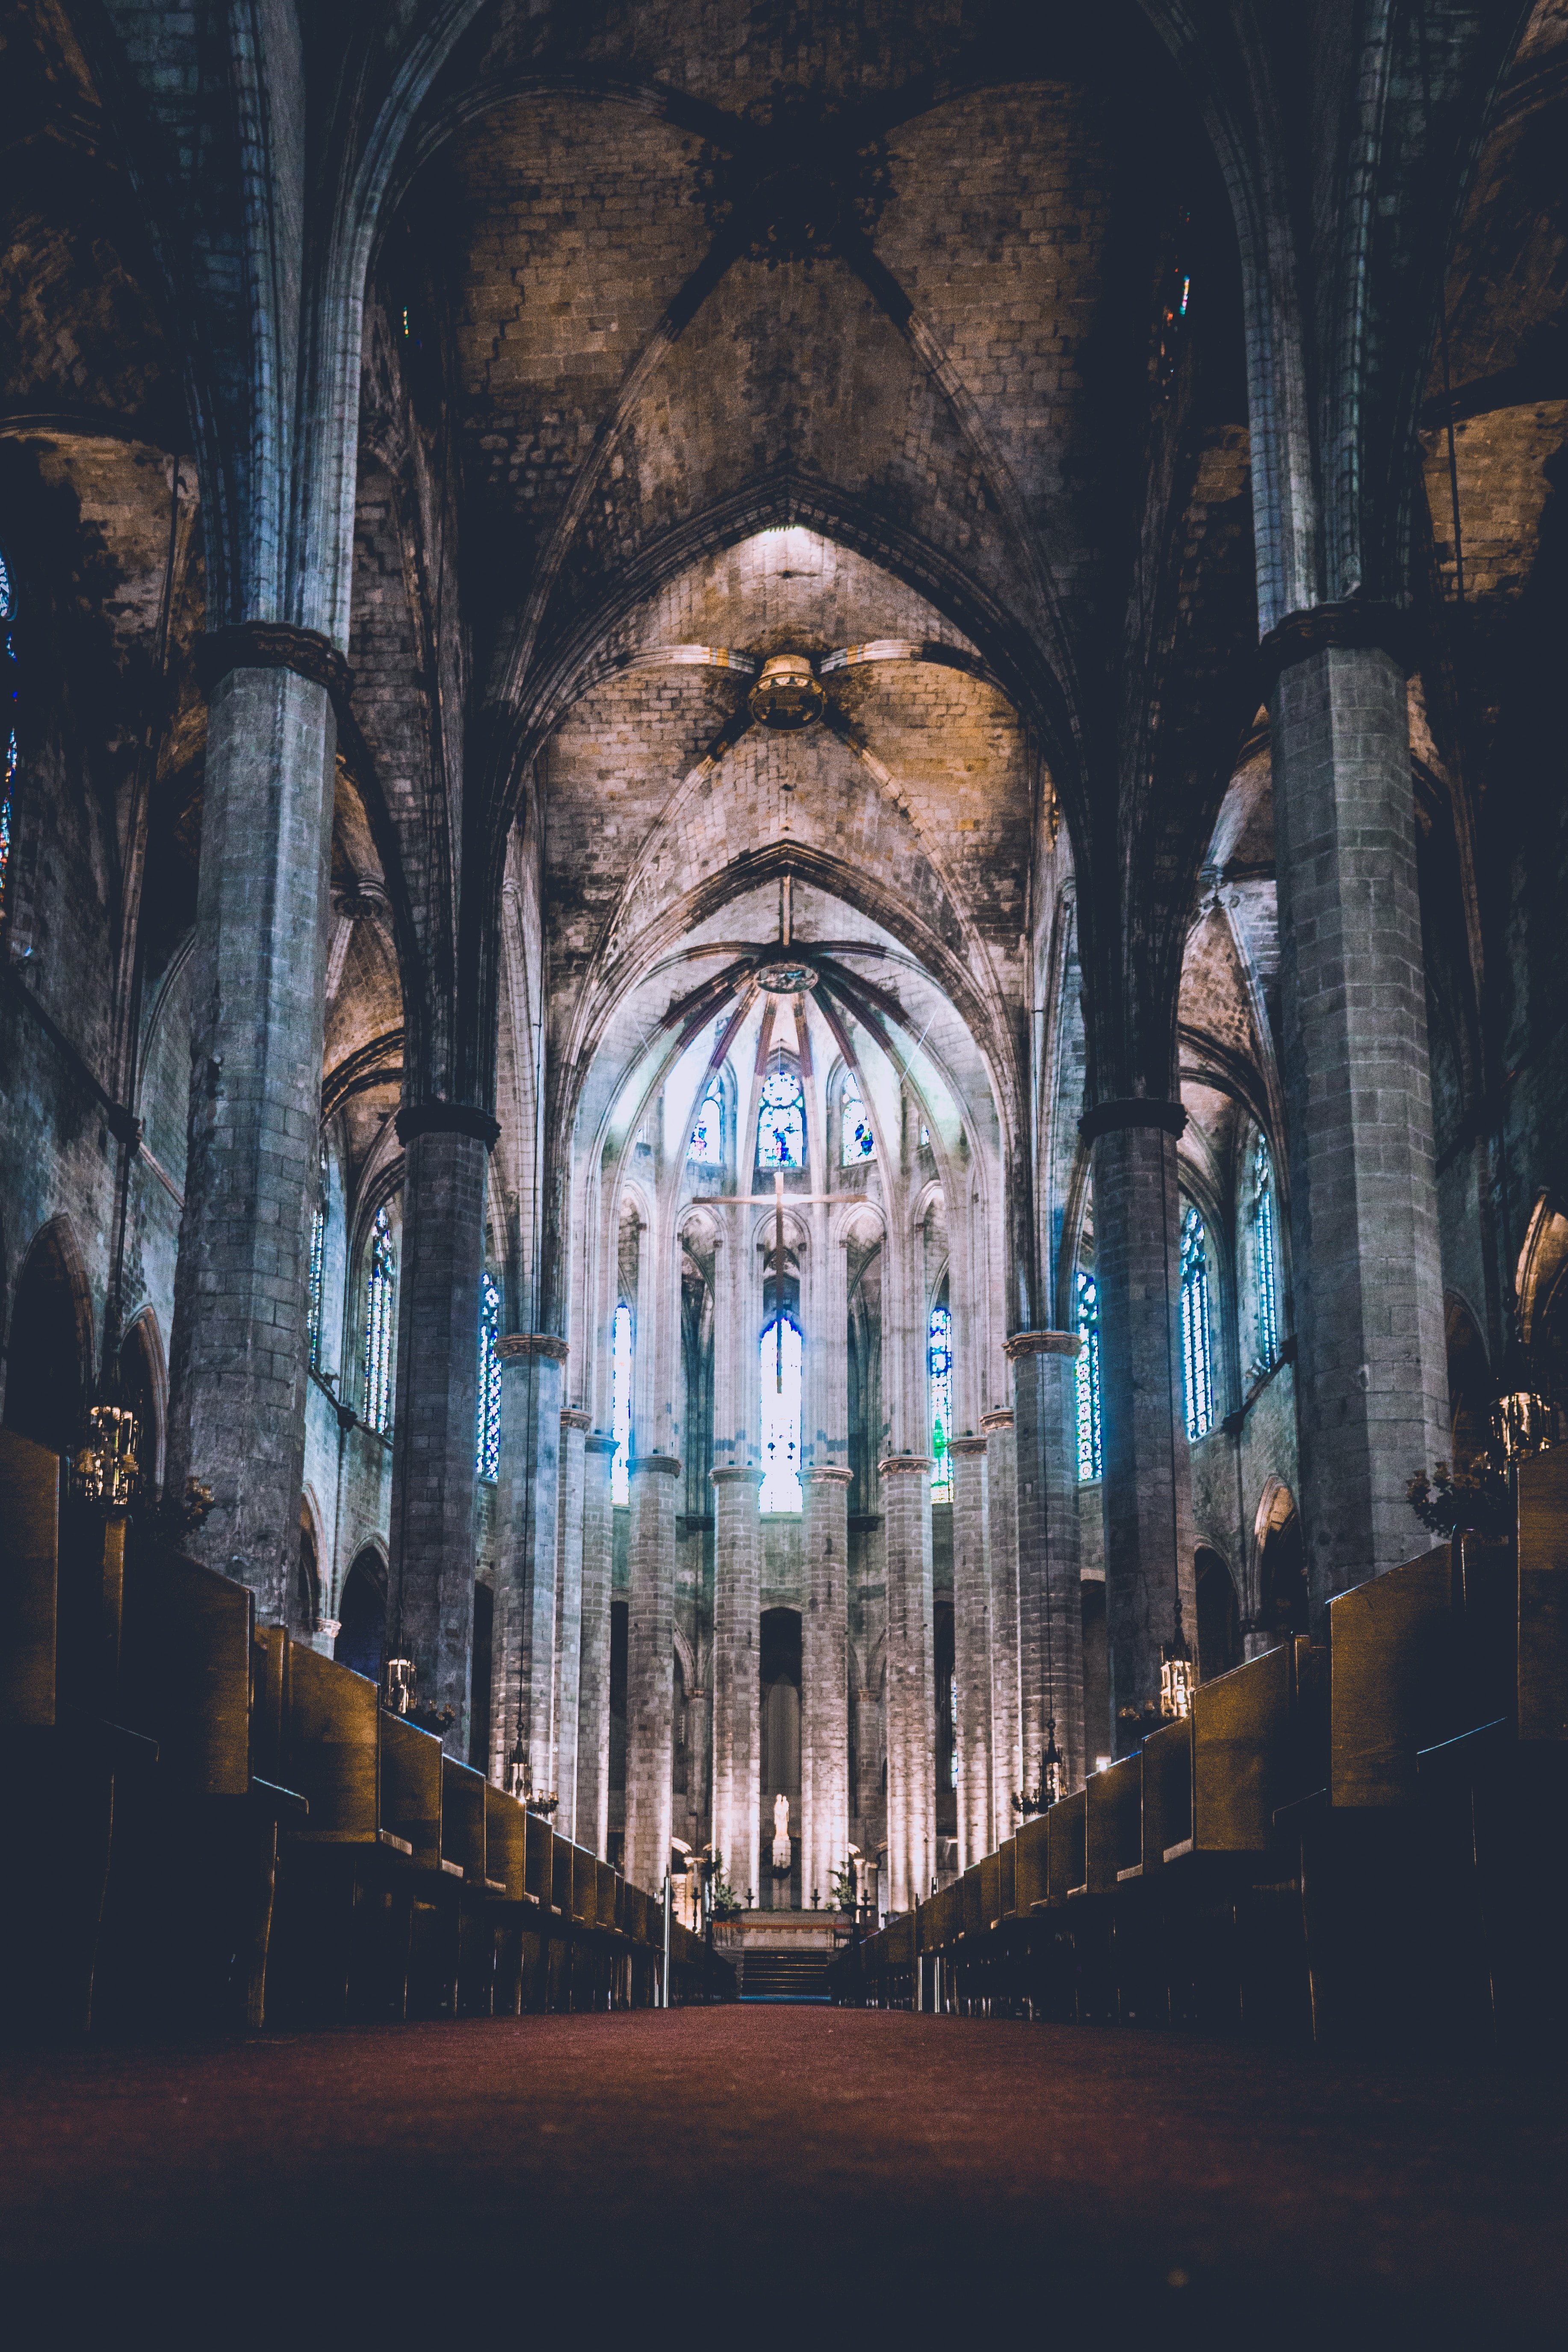 An angled view of an old church ceiling | Source: Unsplash.com